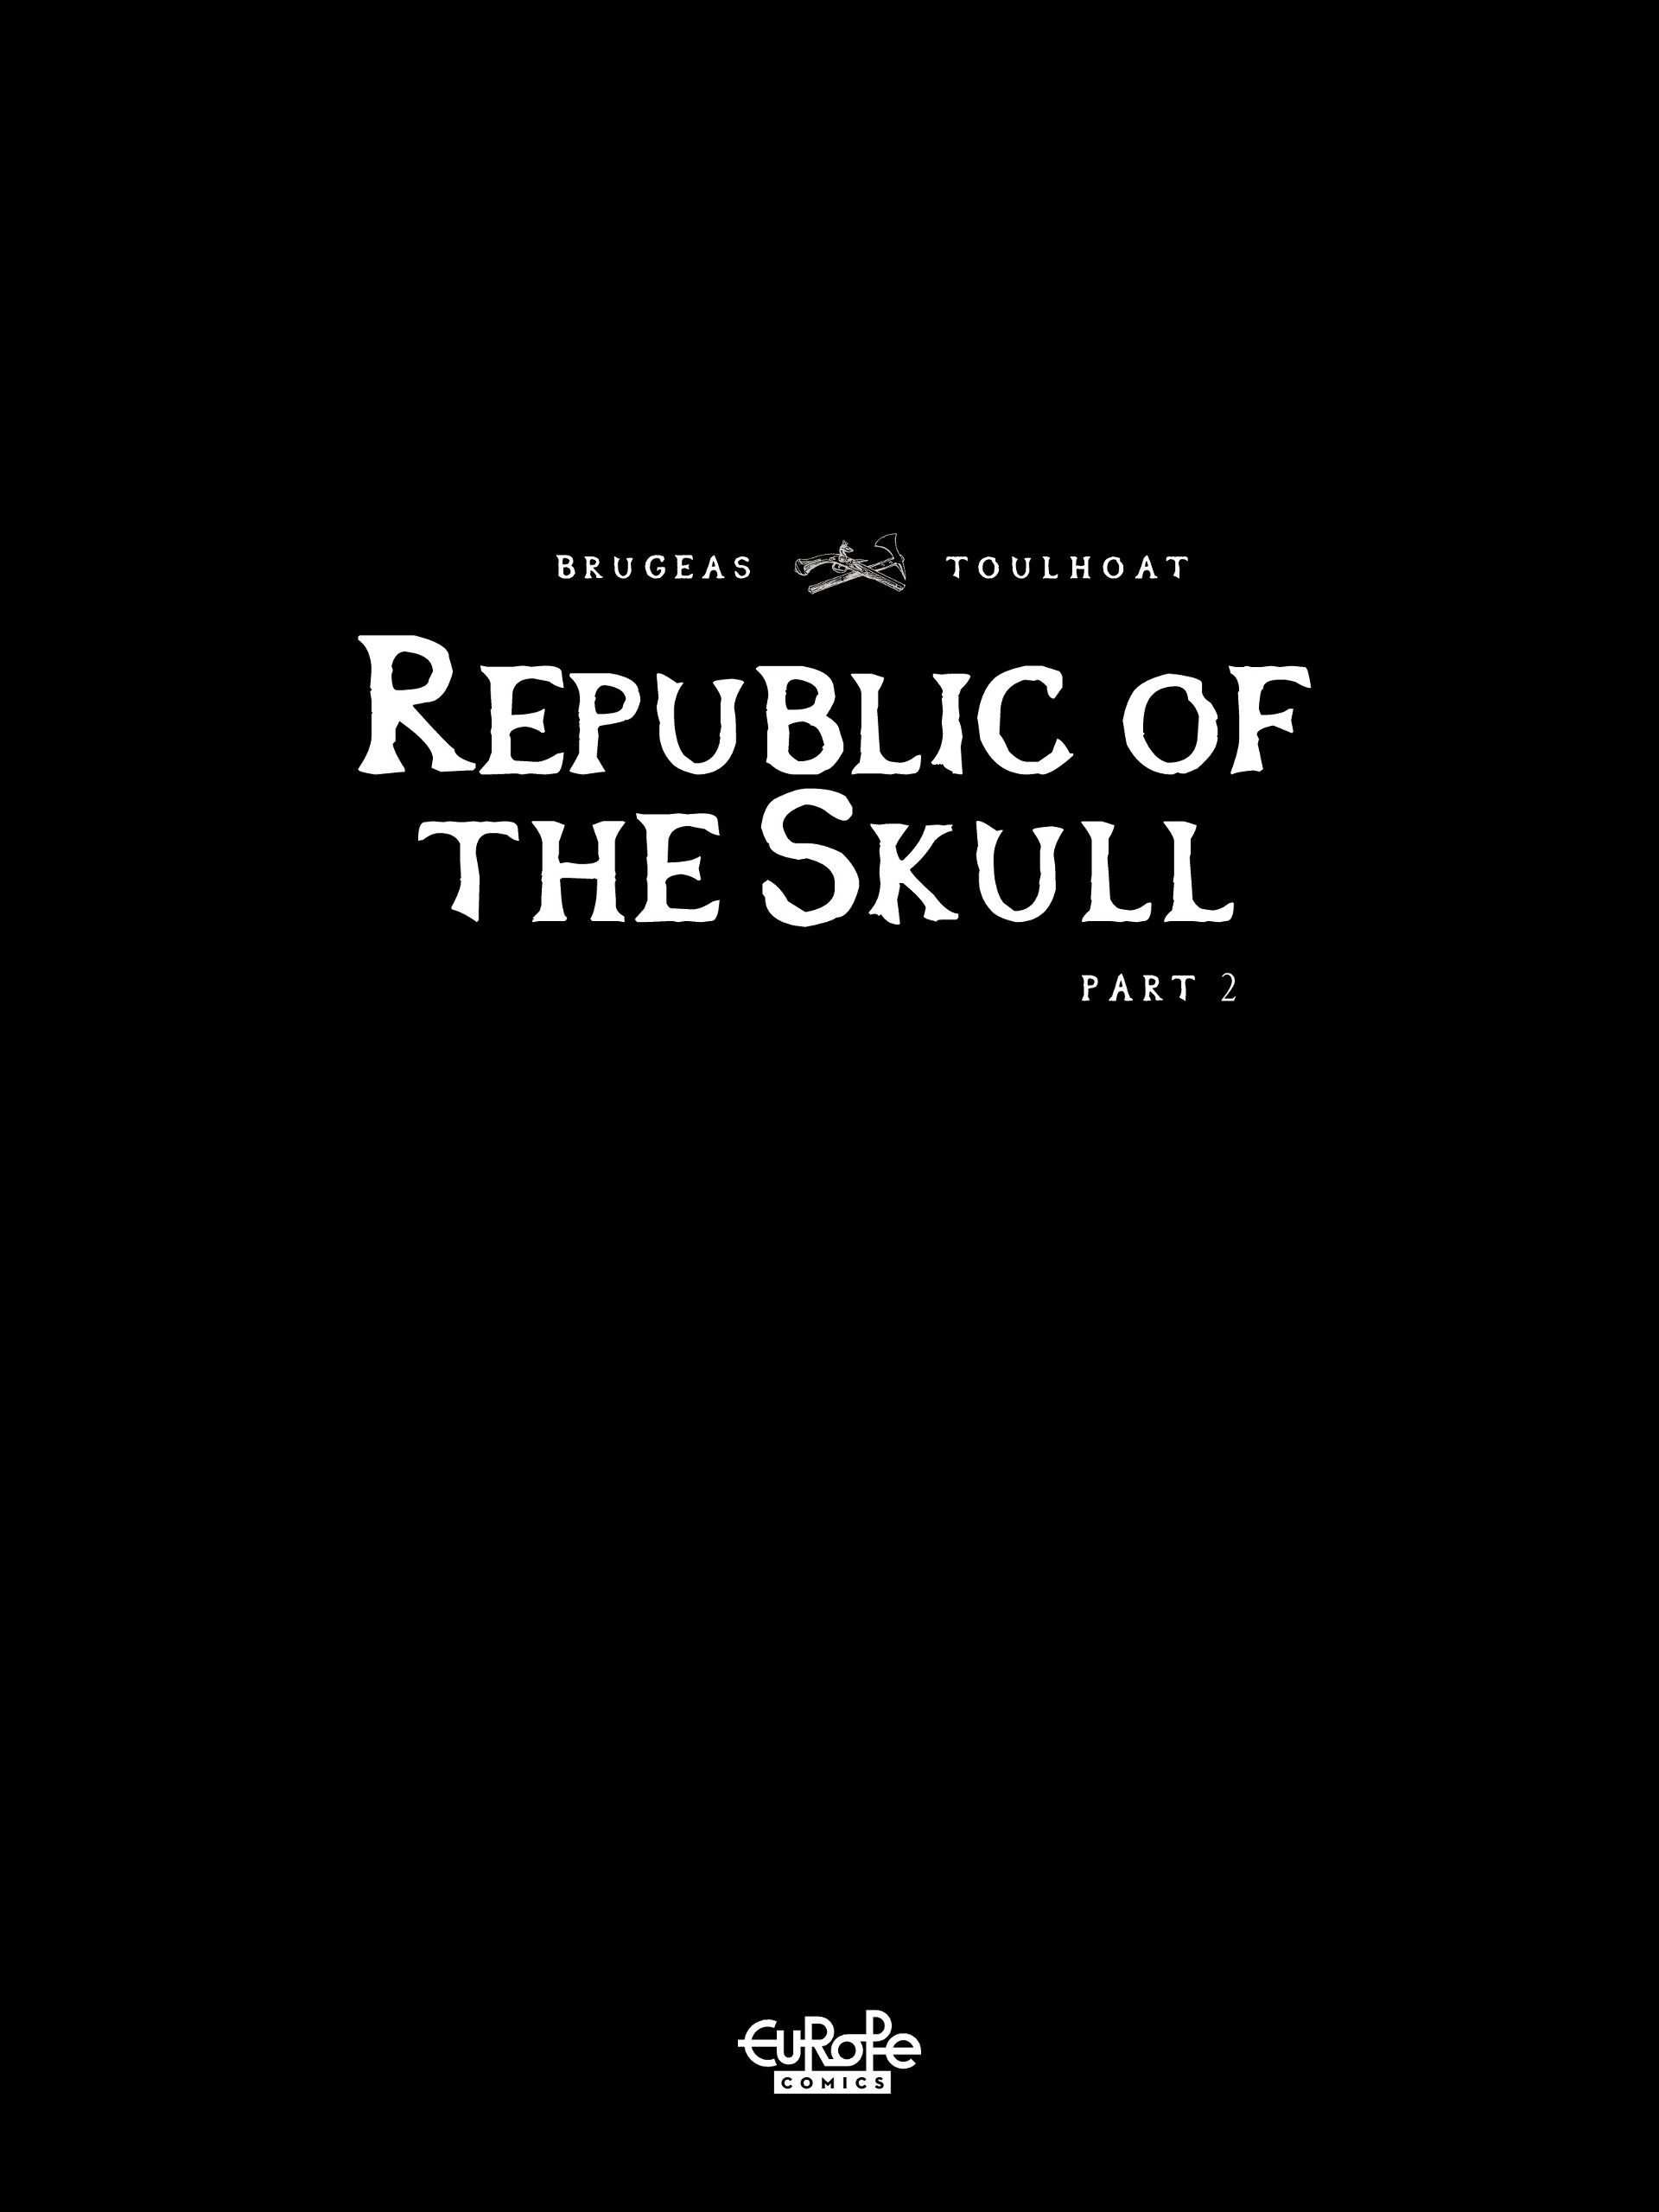 Read online Republic of the Skull comic -  Issue # TPB 2 - 2